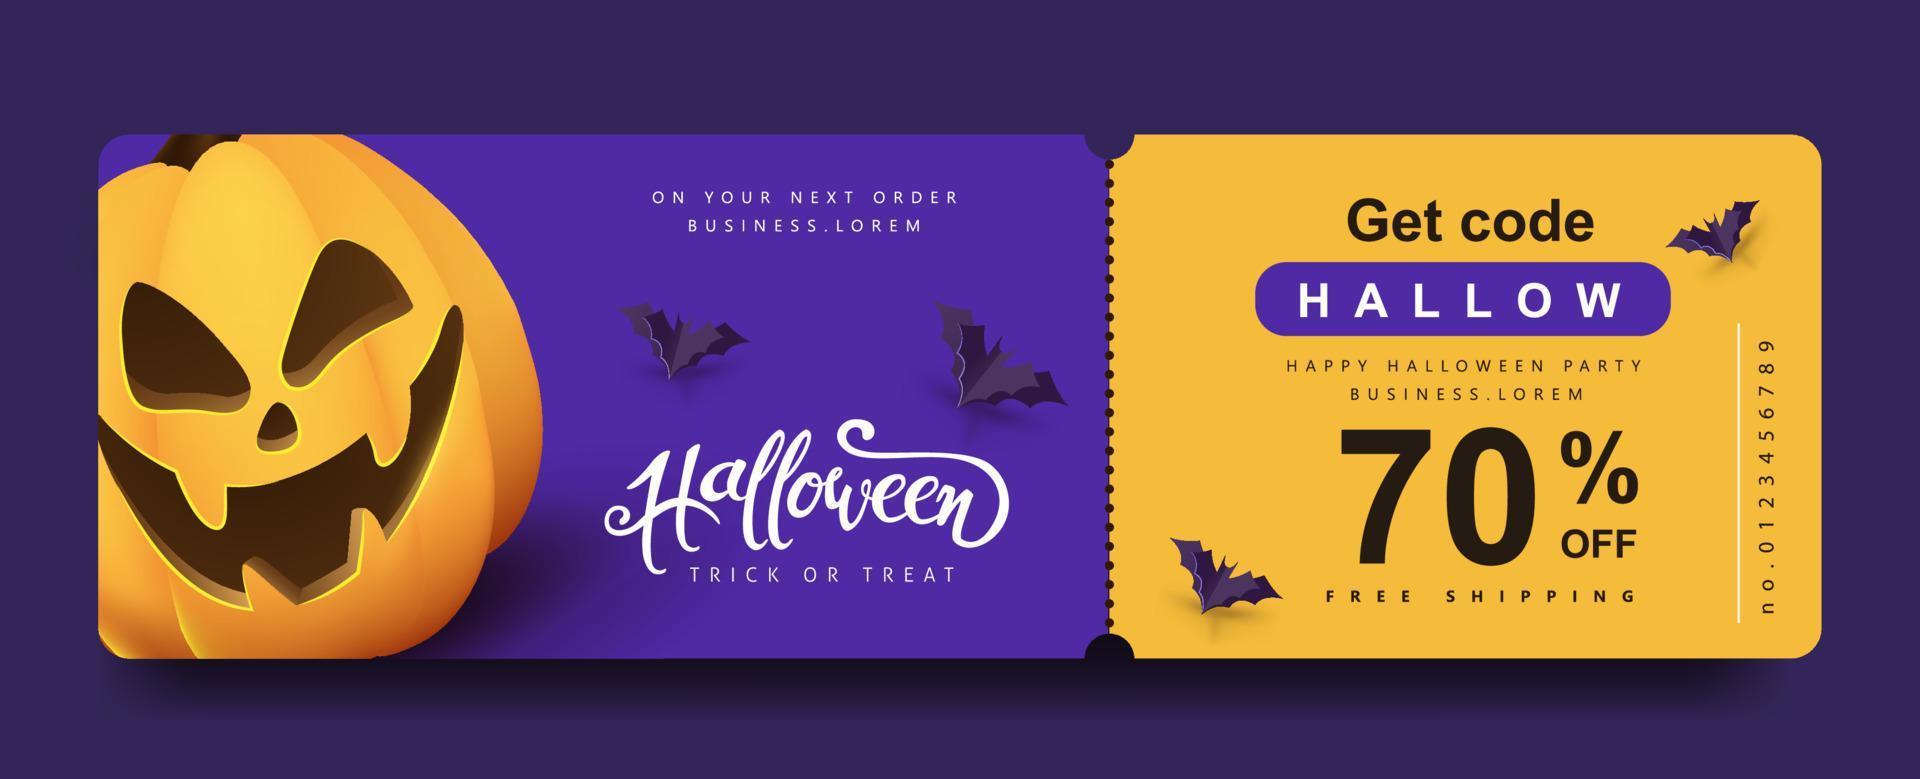 Halloween Gift promotion Coupon banner or party invitation background vector